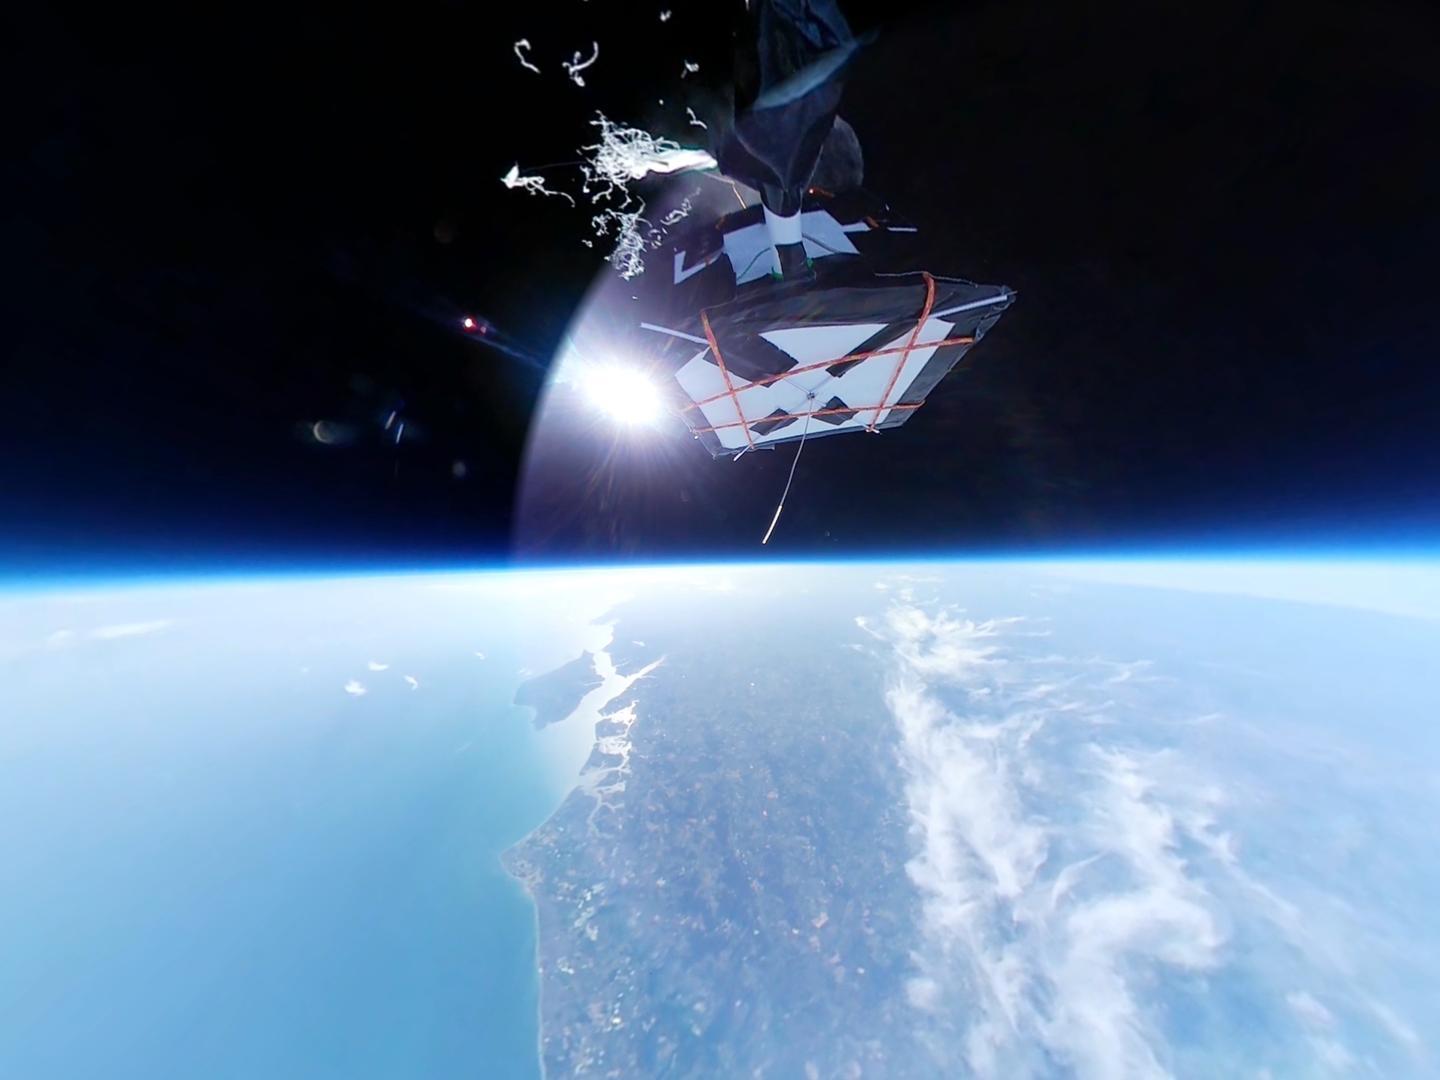 A camera sent into space by students from Worthing has captured some stunning photos of the earth from above. The moment the balloon burst. Twitter: @CHITS_Project